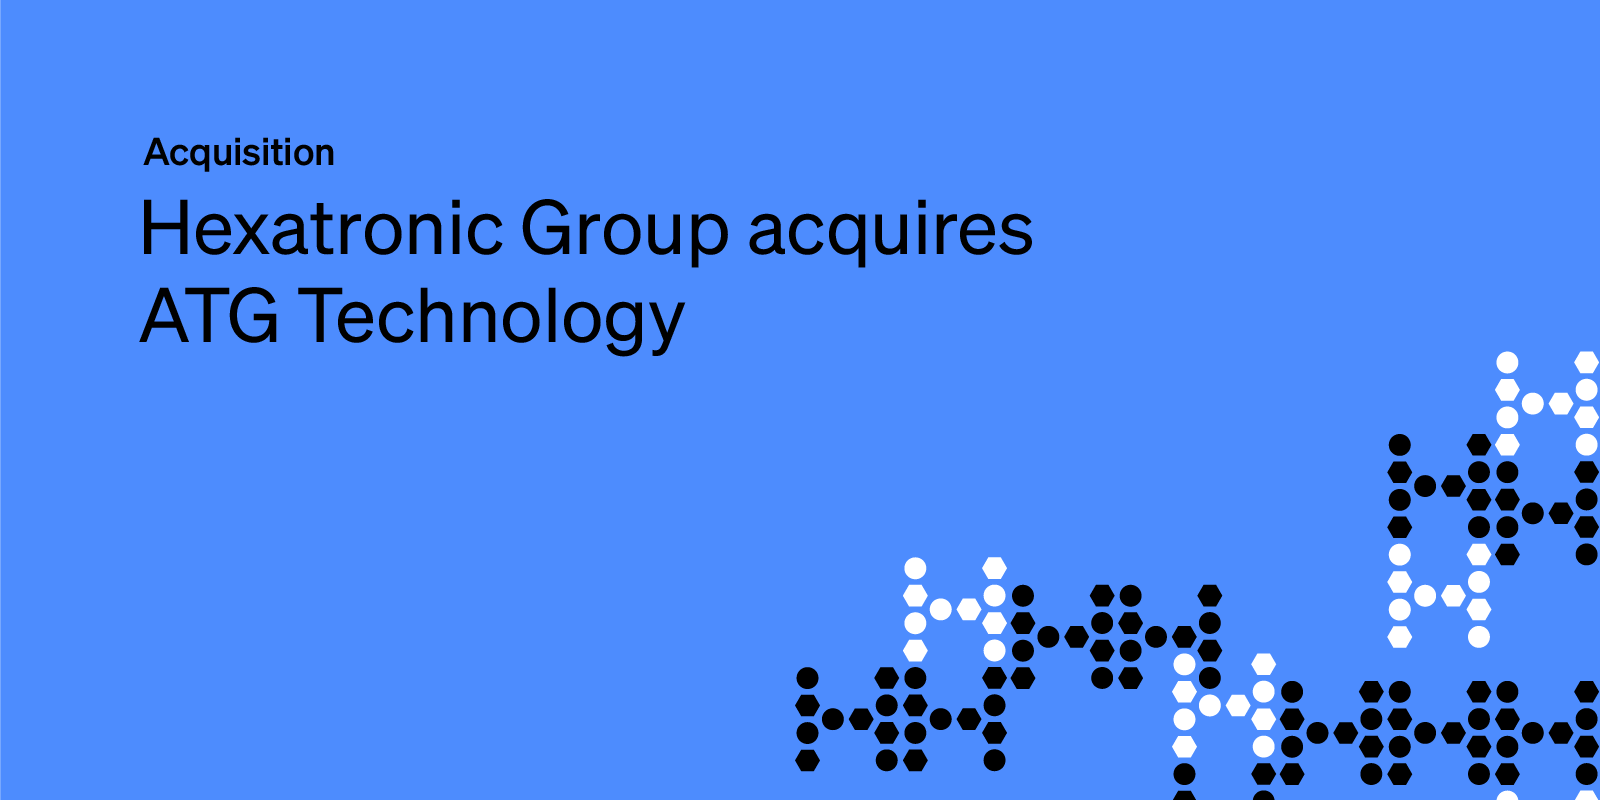 Hexatronic Group acquires ATG Technology and expands its presence in the New Zealand market